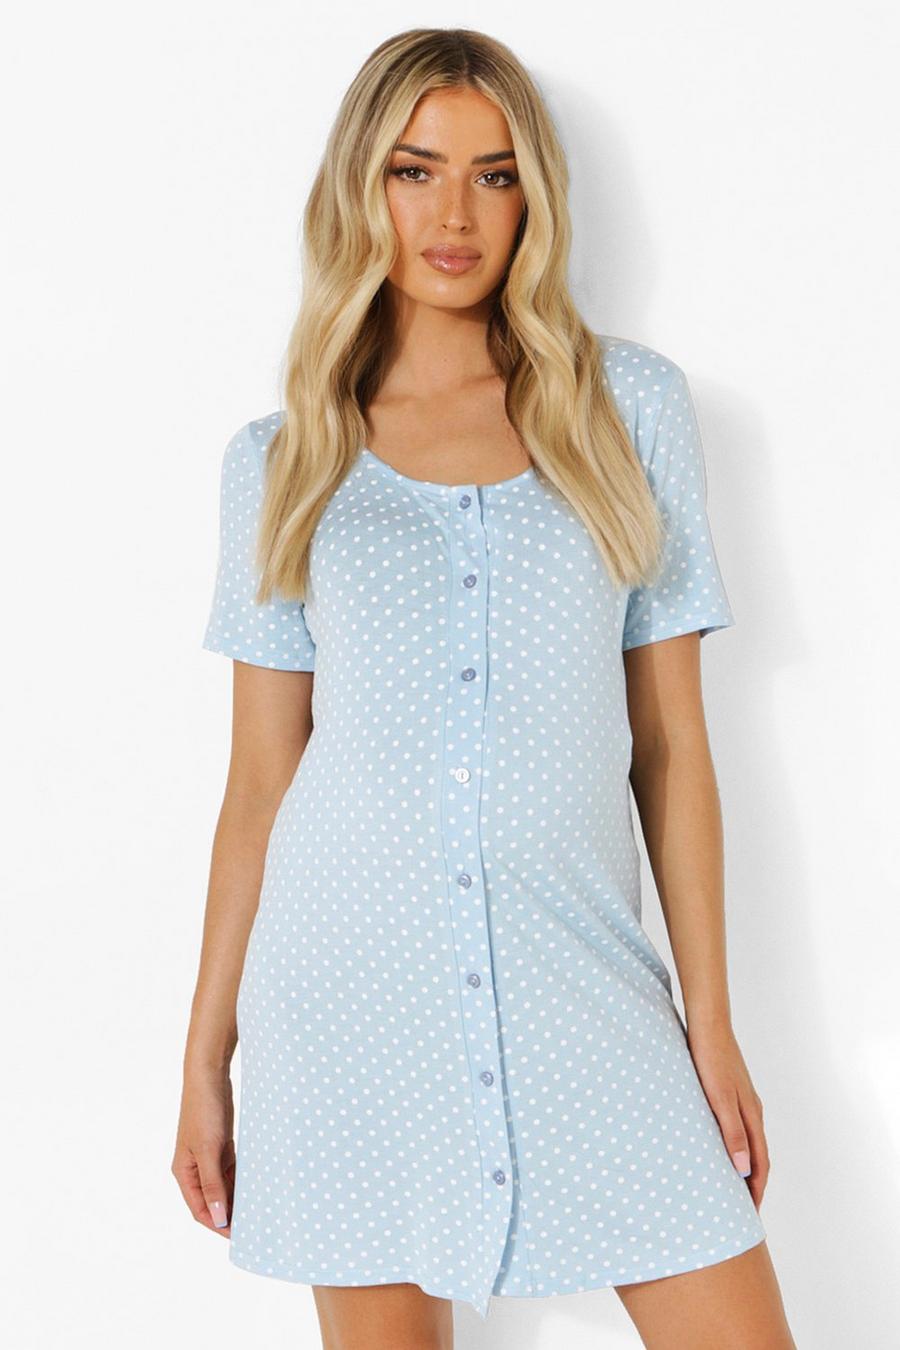 Baby blue Maternity Polka Dot Button Front Nightie